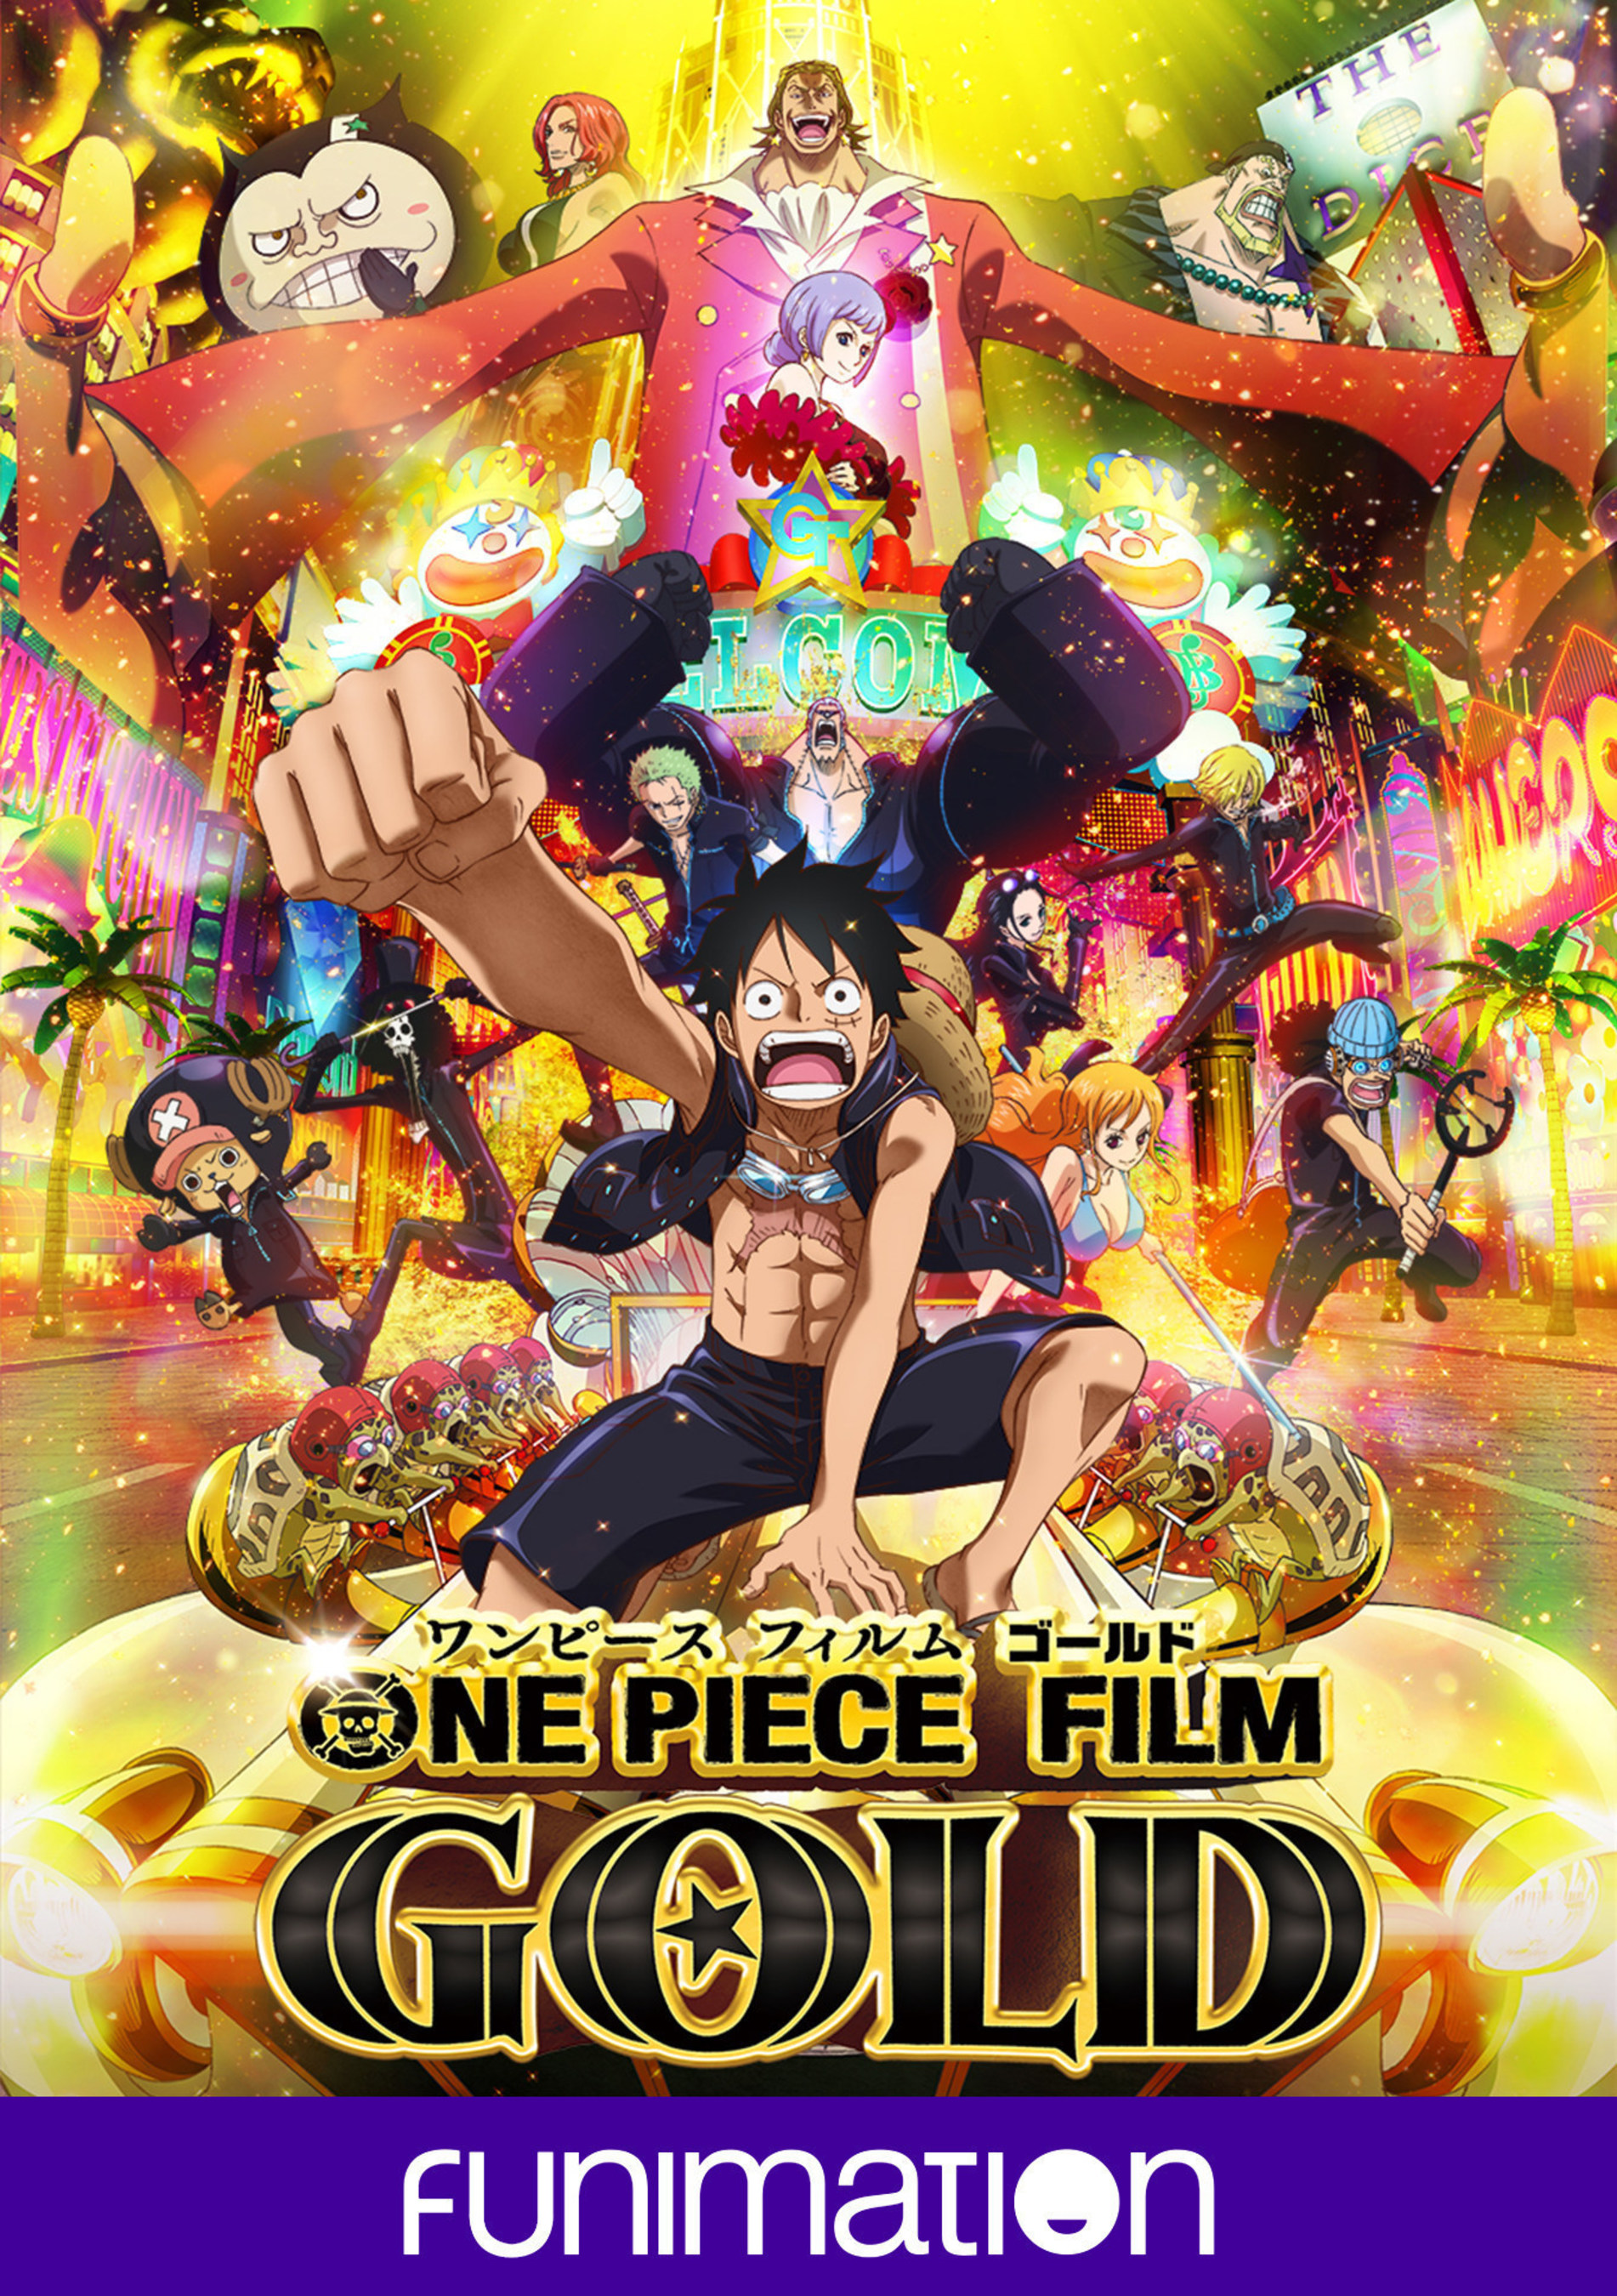 X 上的Funimation：「Want to win your own One Piece Film Gold